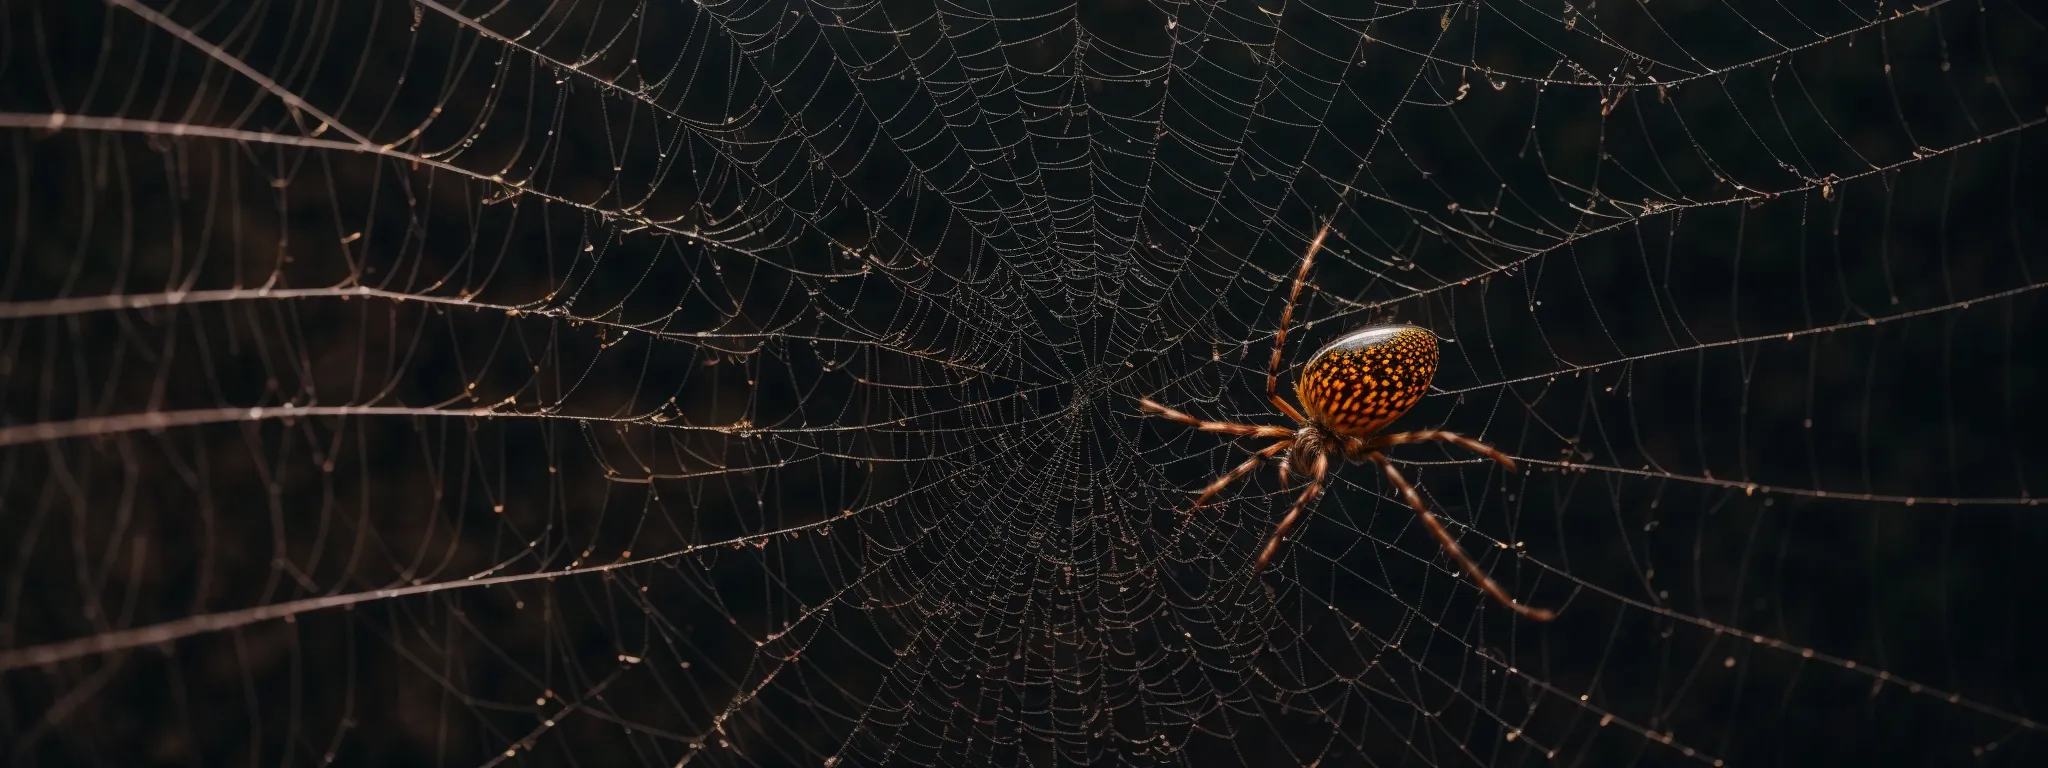 a spider weaving a complex and intricate web, illustrating the concept of interlinked pathways within a network.